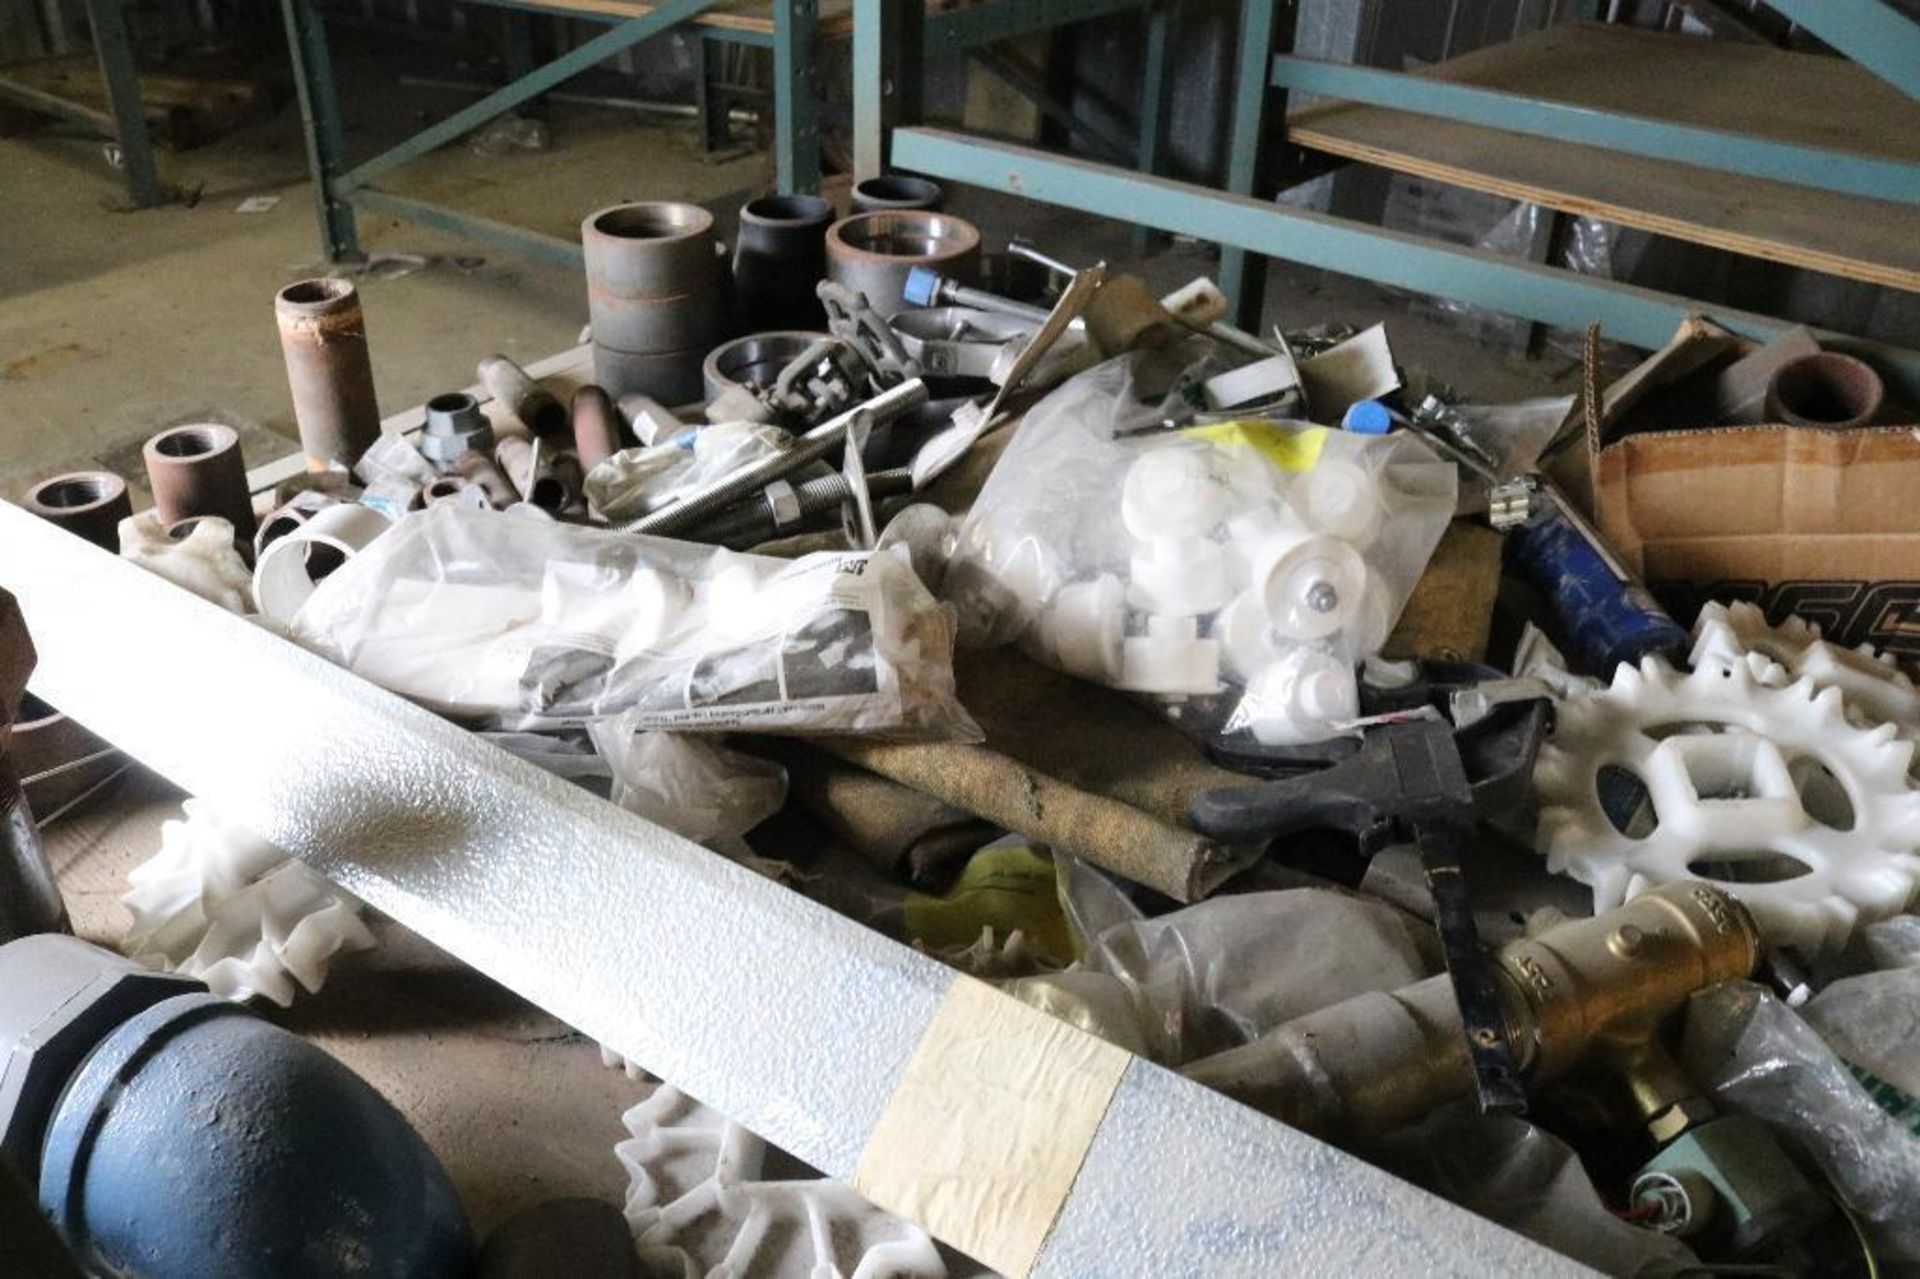 Contents of Shelves - Includes Pipe Fittings, Flanges, and Other Misc. Pipe Components - Image 8 of 9